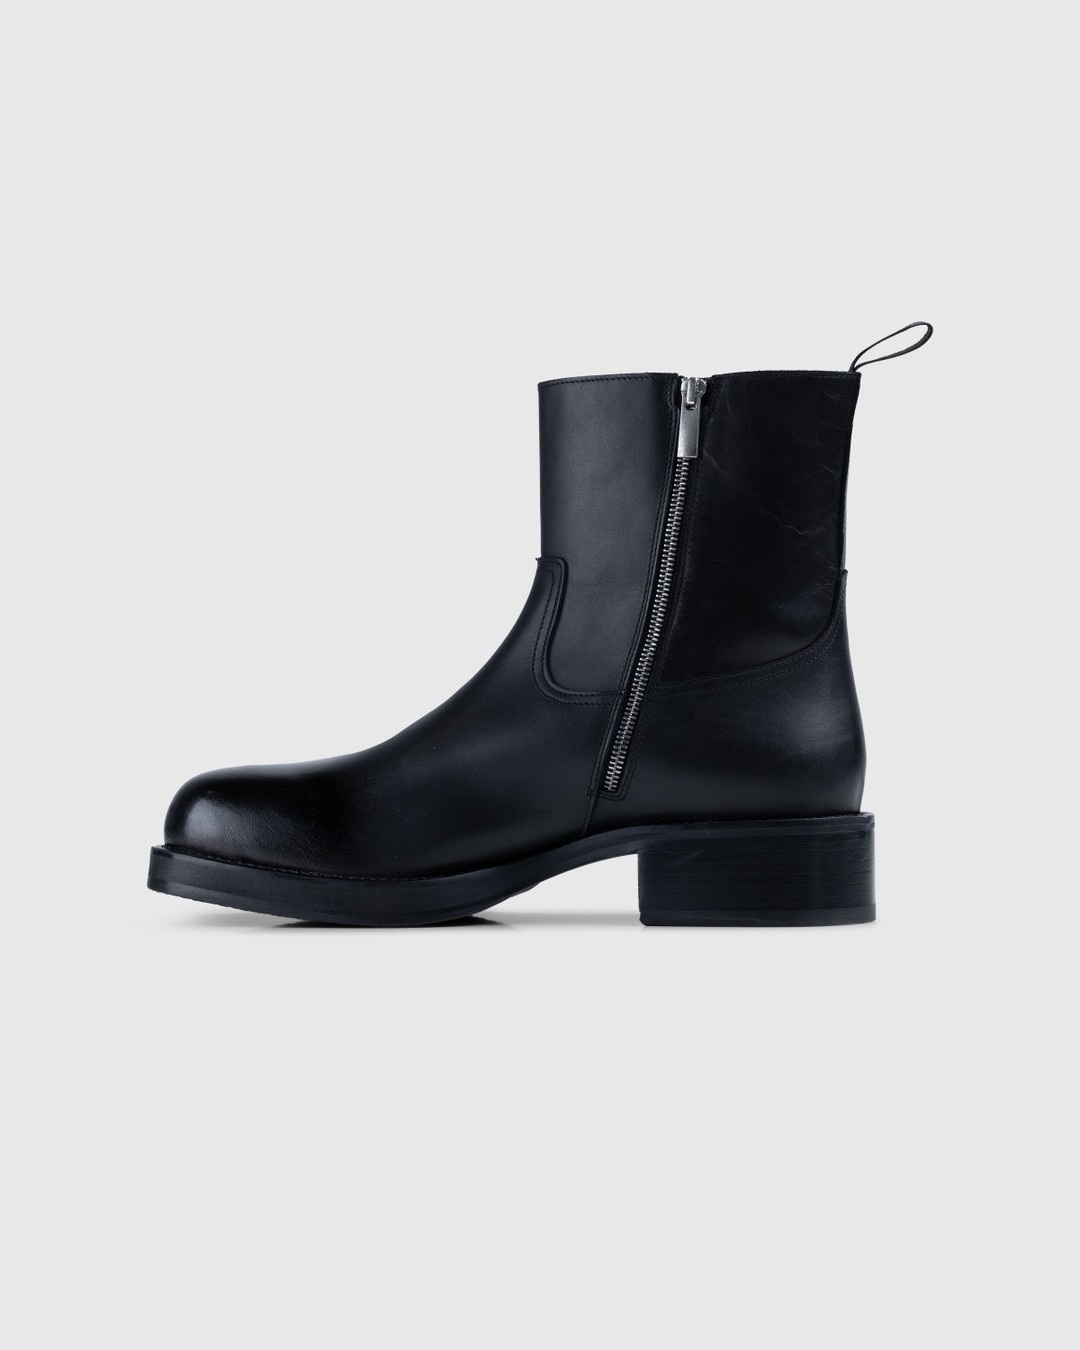 Acne Studios – Sprayed Leather Ankle Boots Black - Boots - Black - Image 2